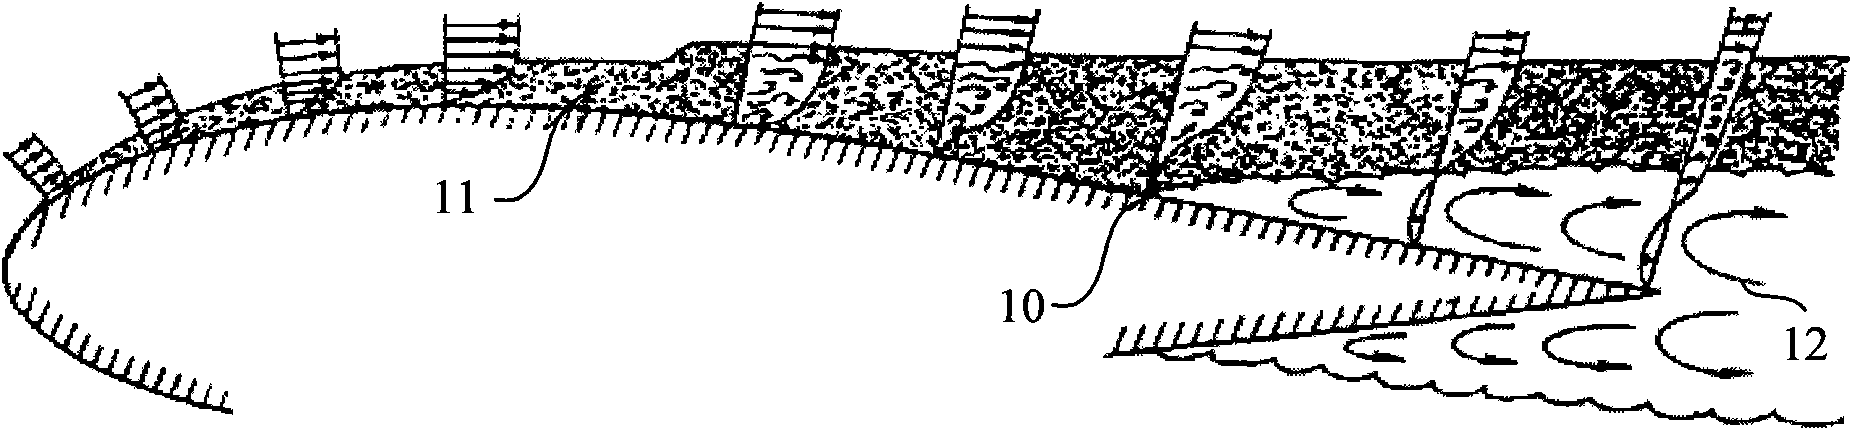 Reverse circulation blowing-down device of wing boundary layer